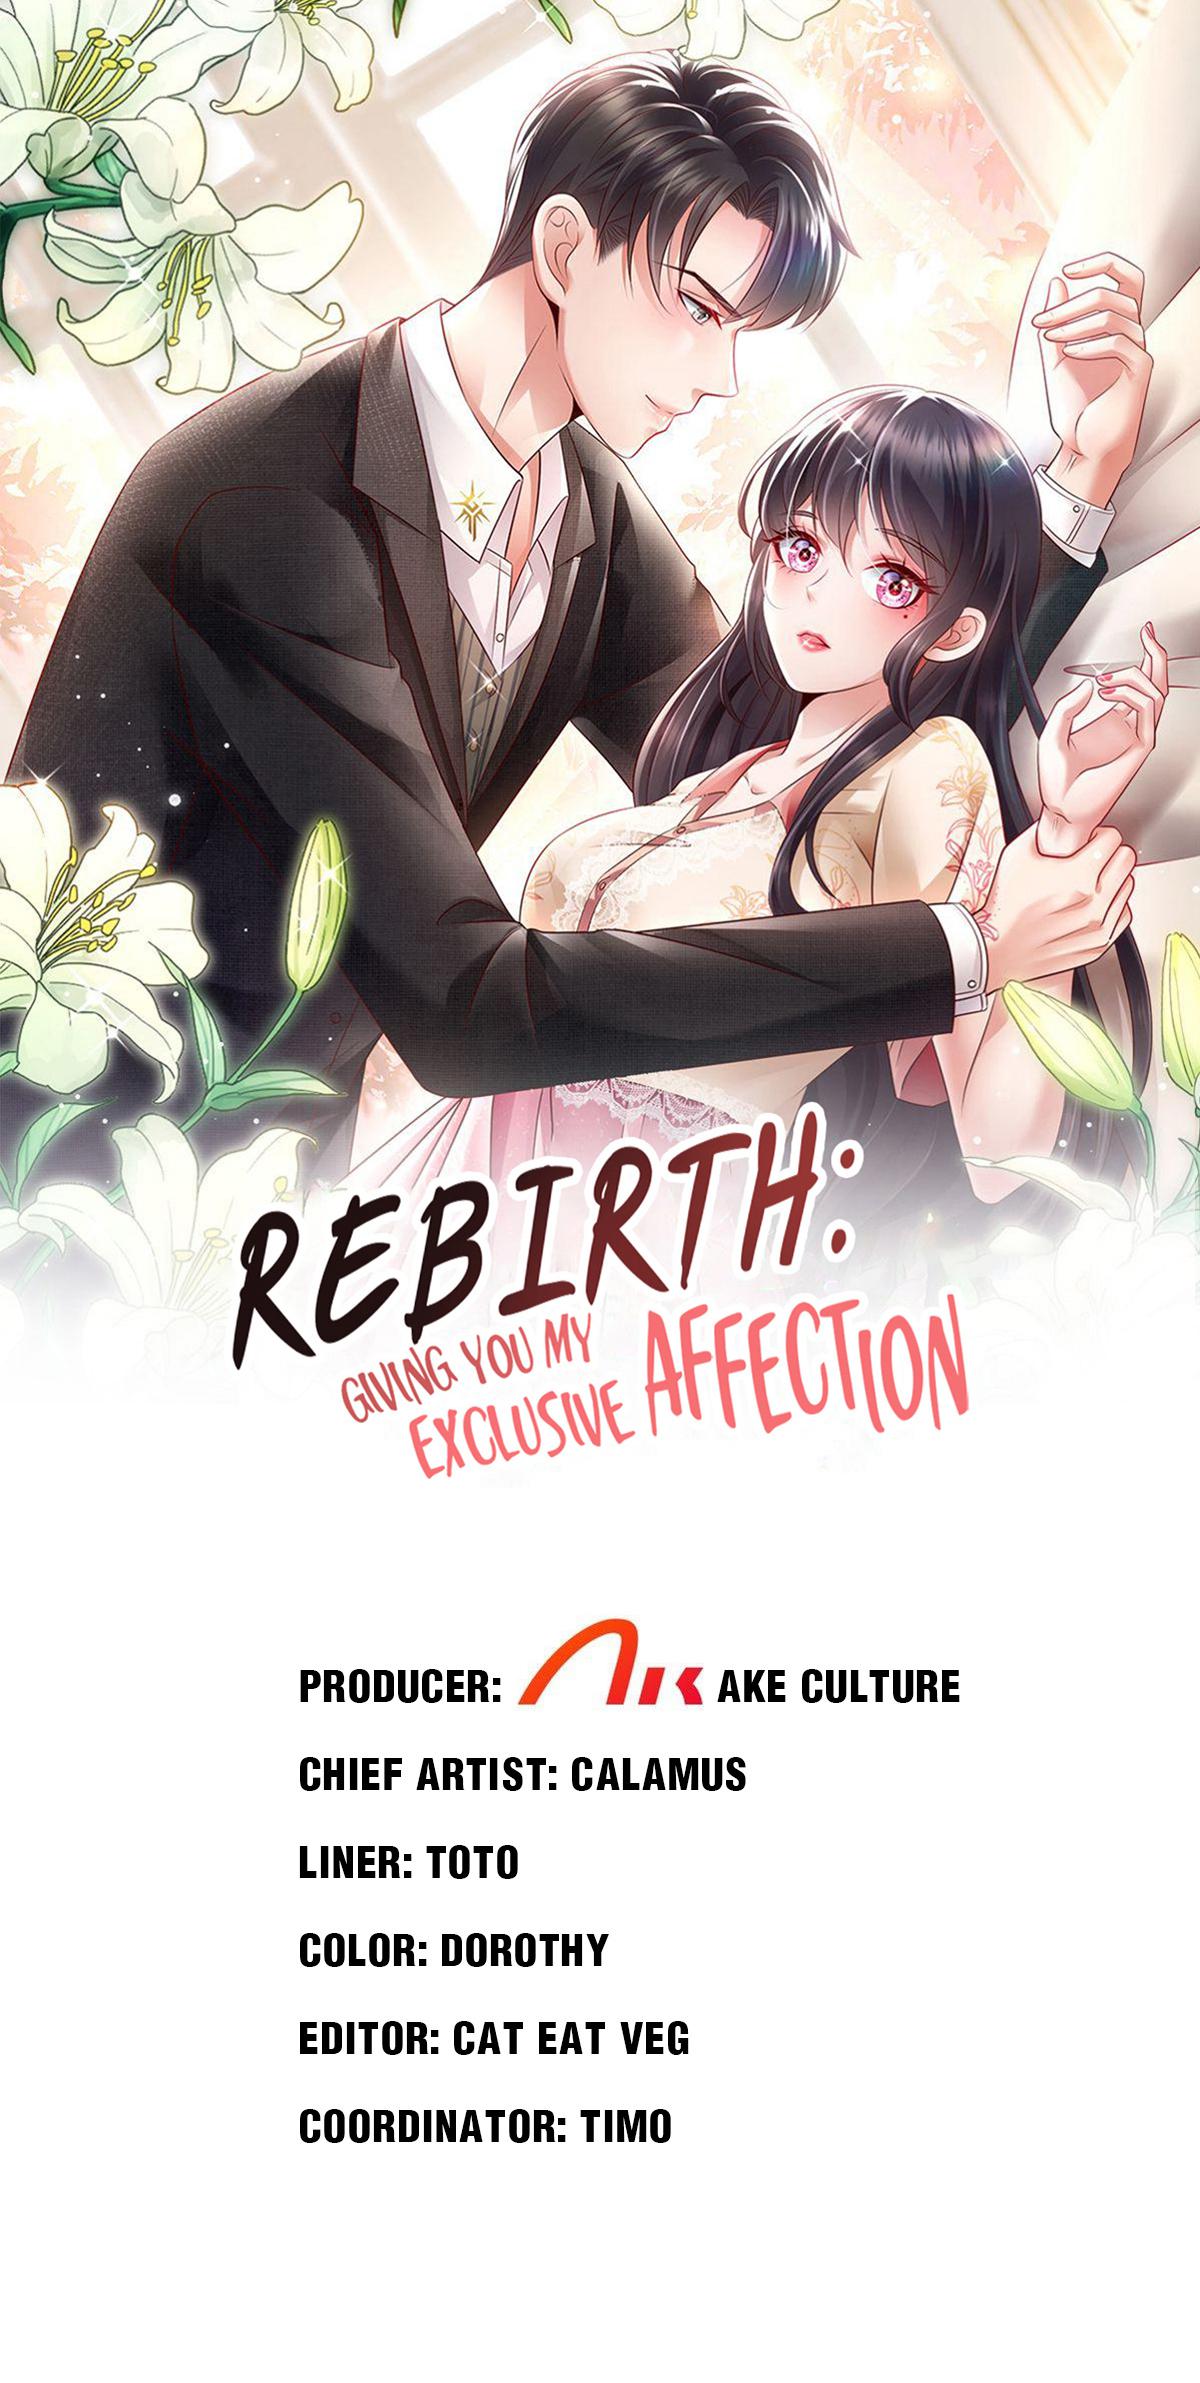 Rebirth: Giving You My Exclusive Affection 221